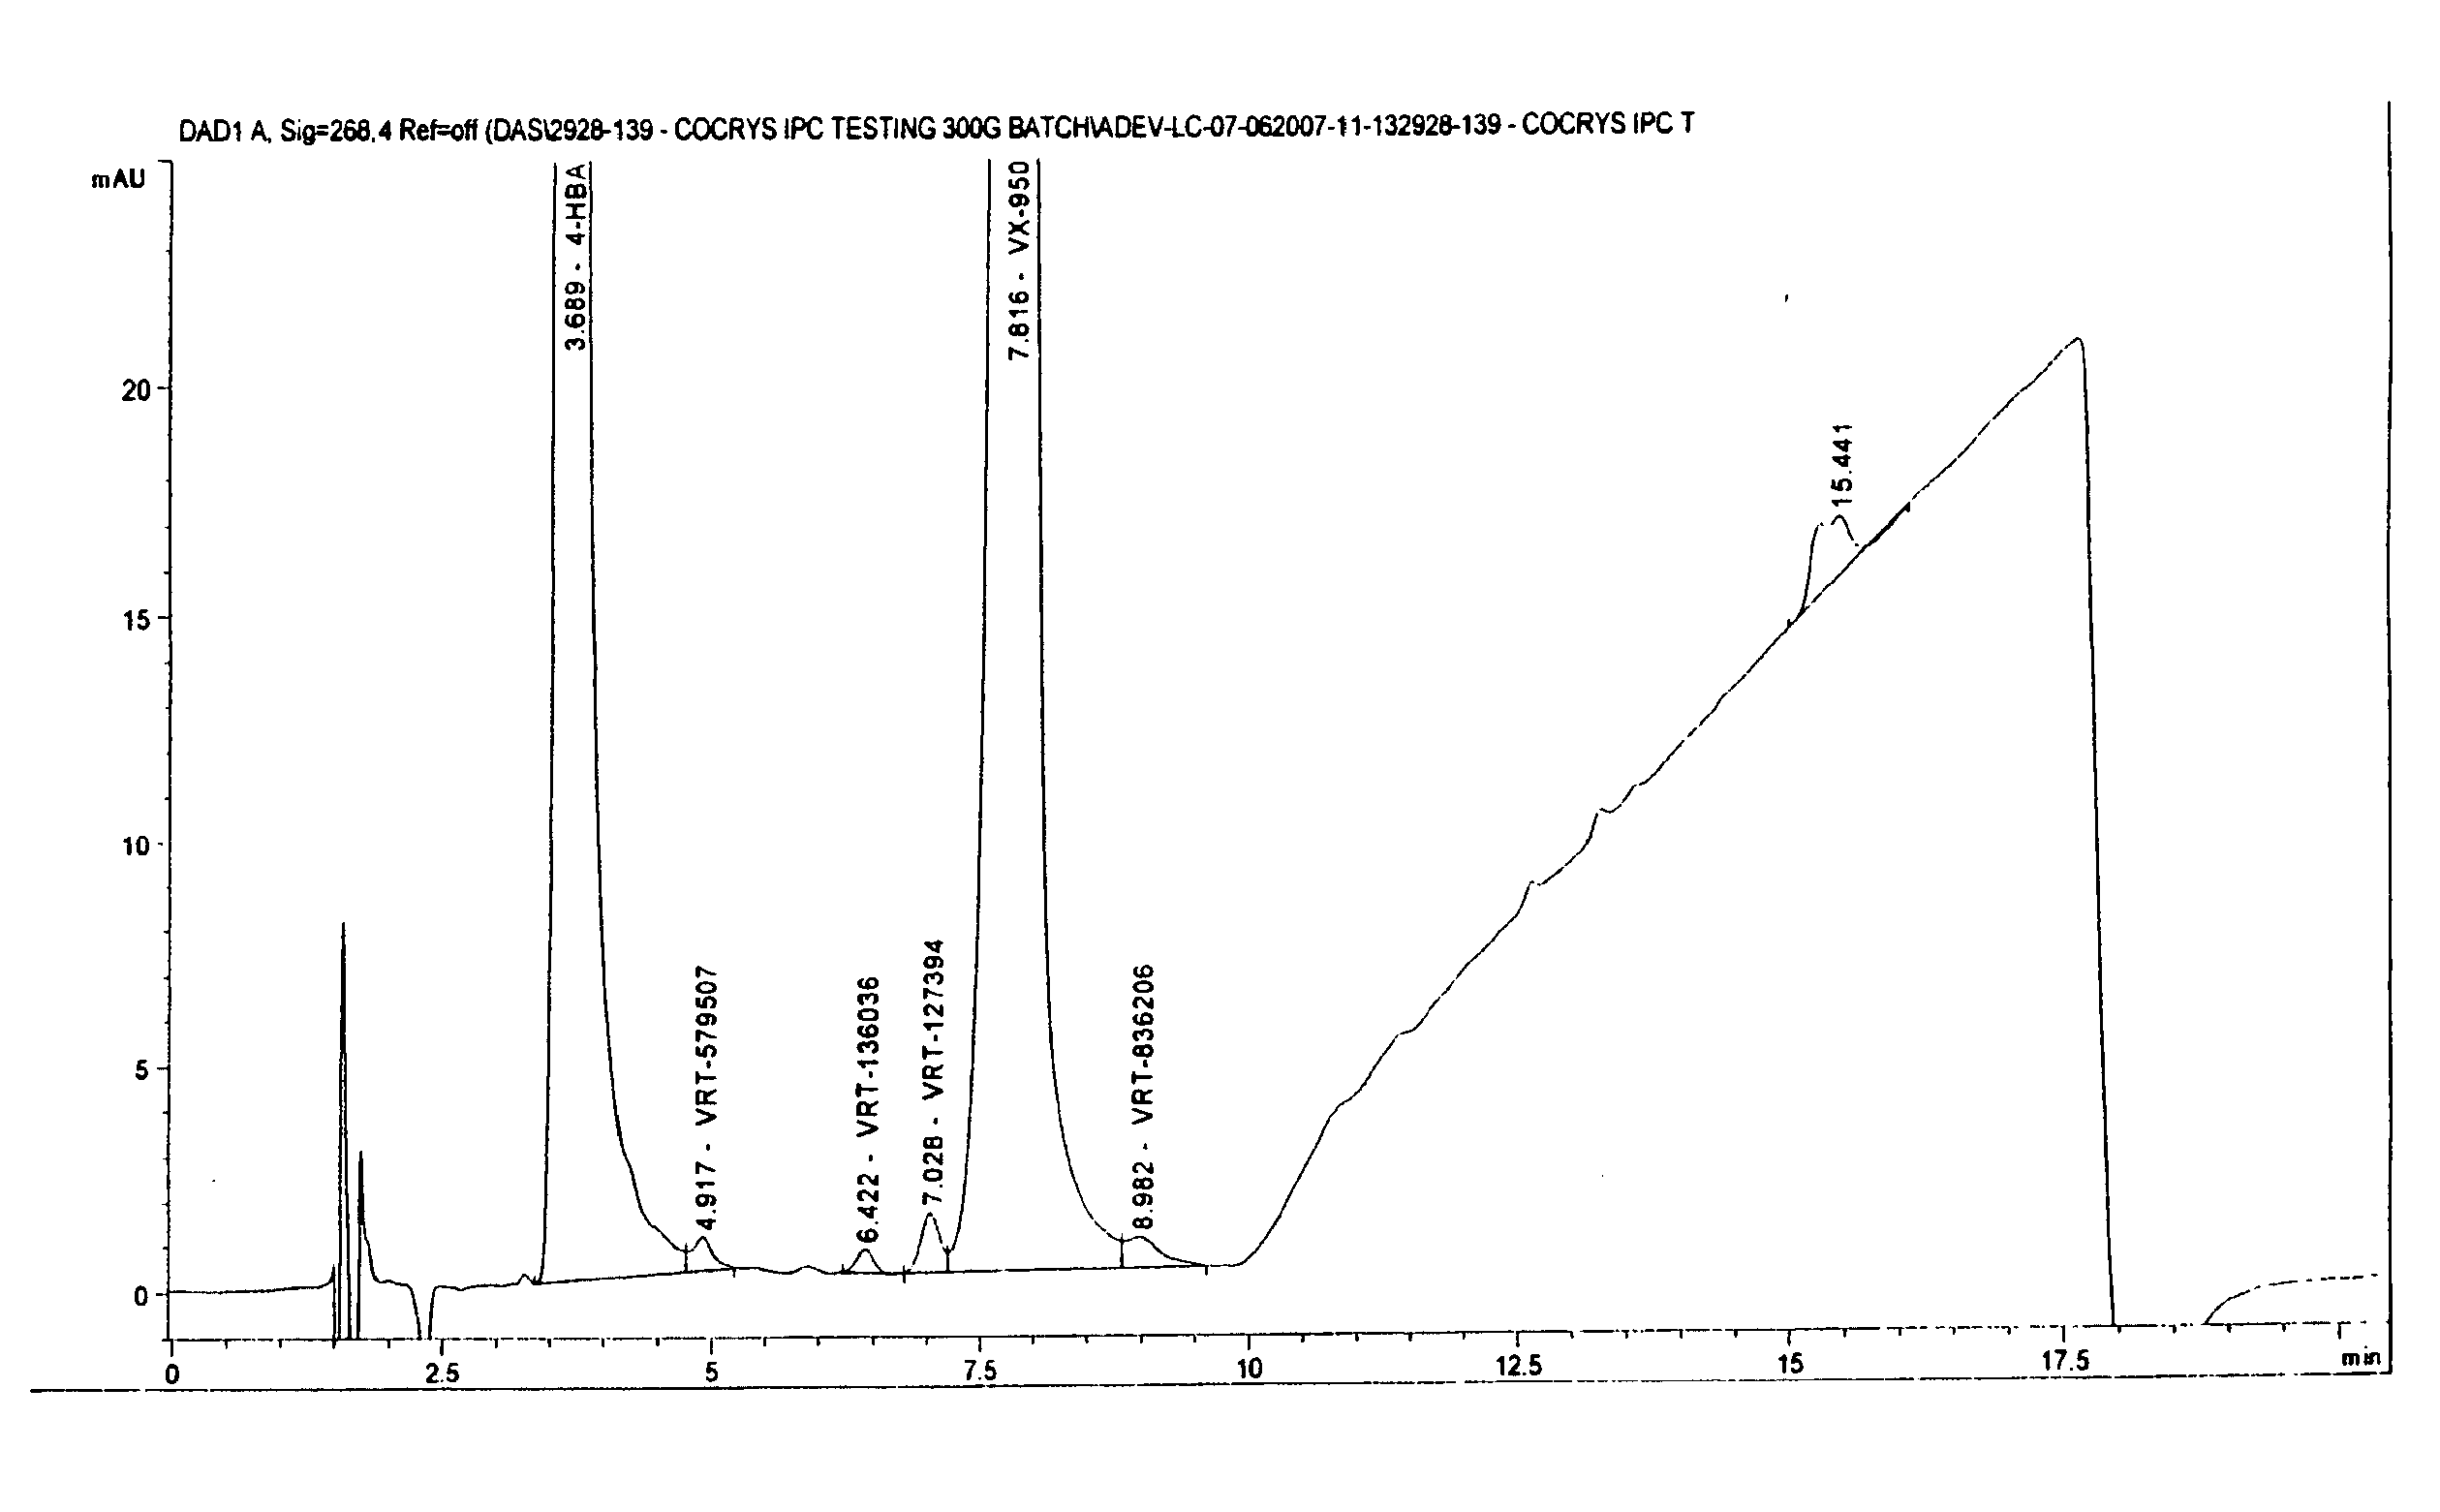 Co-Crystals and Pharmaceutical Compositions Comprising the Same